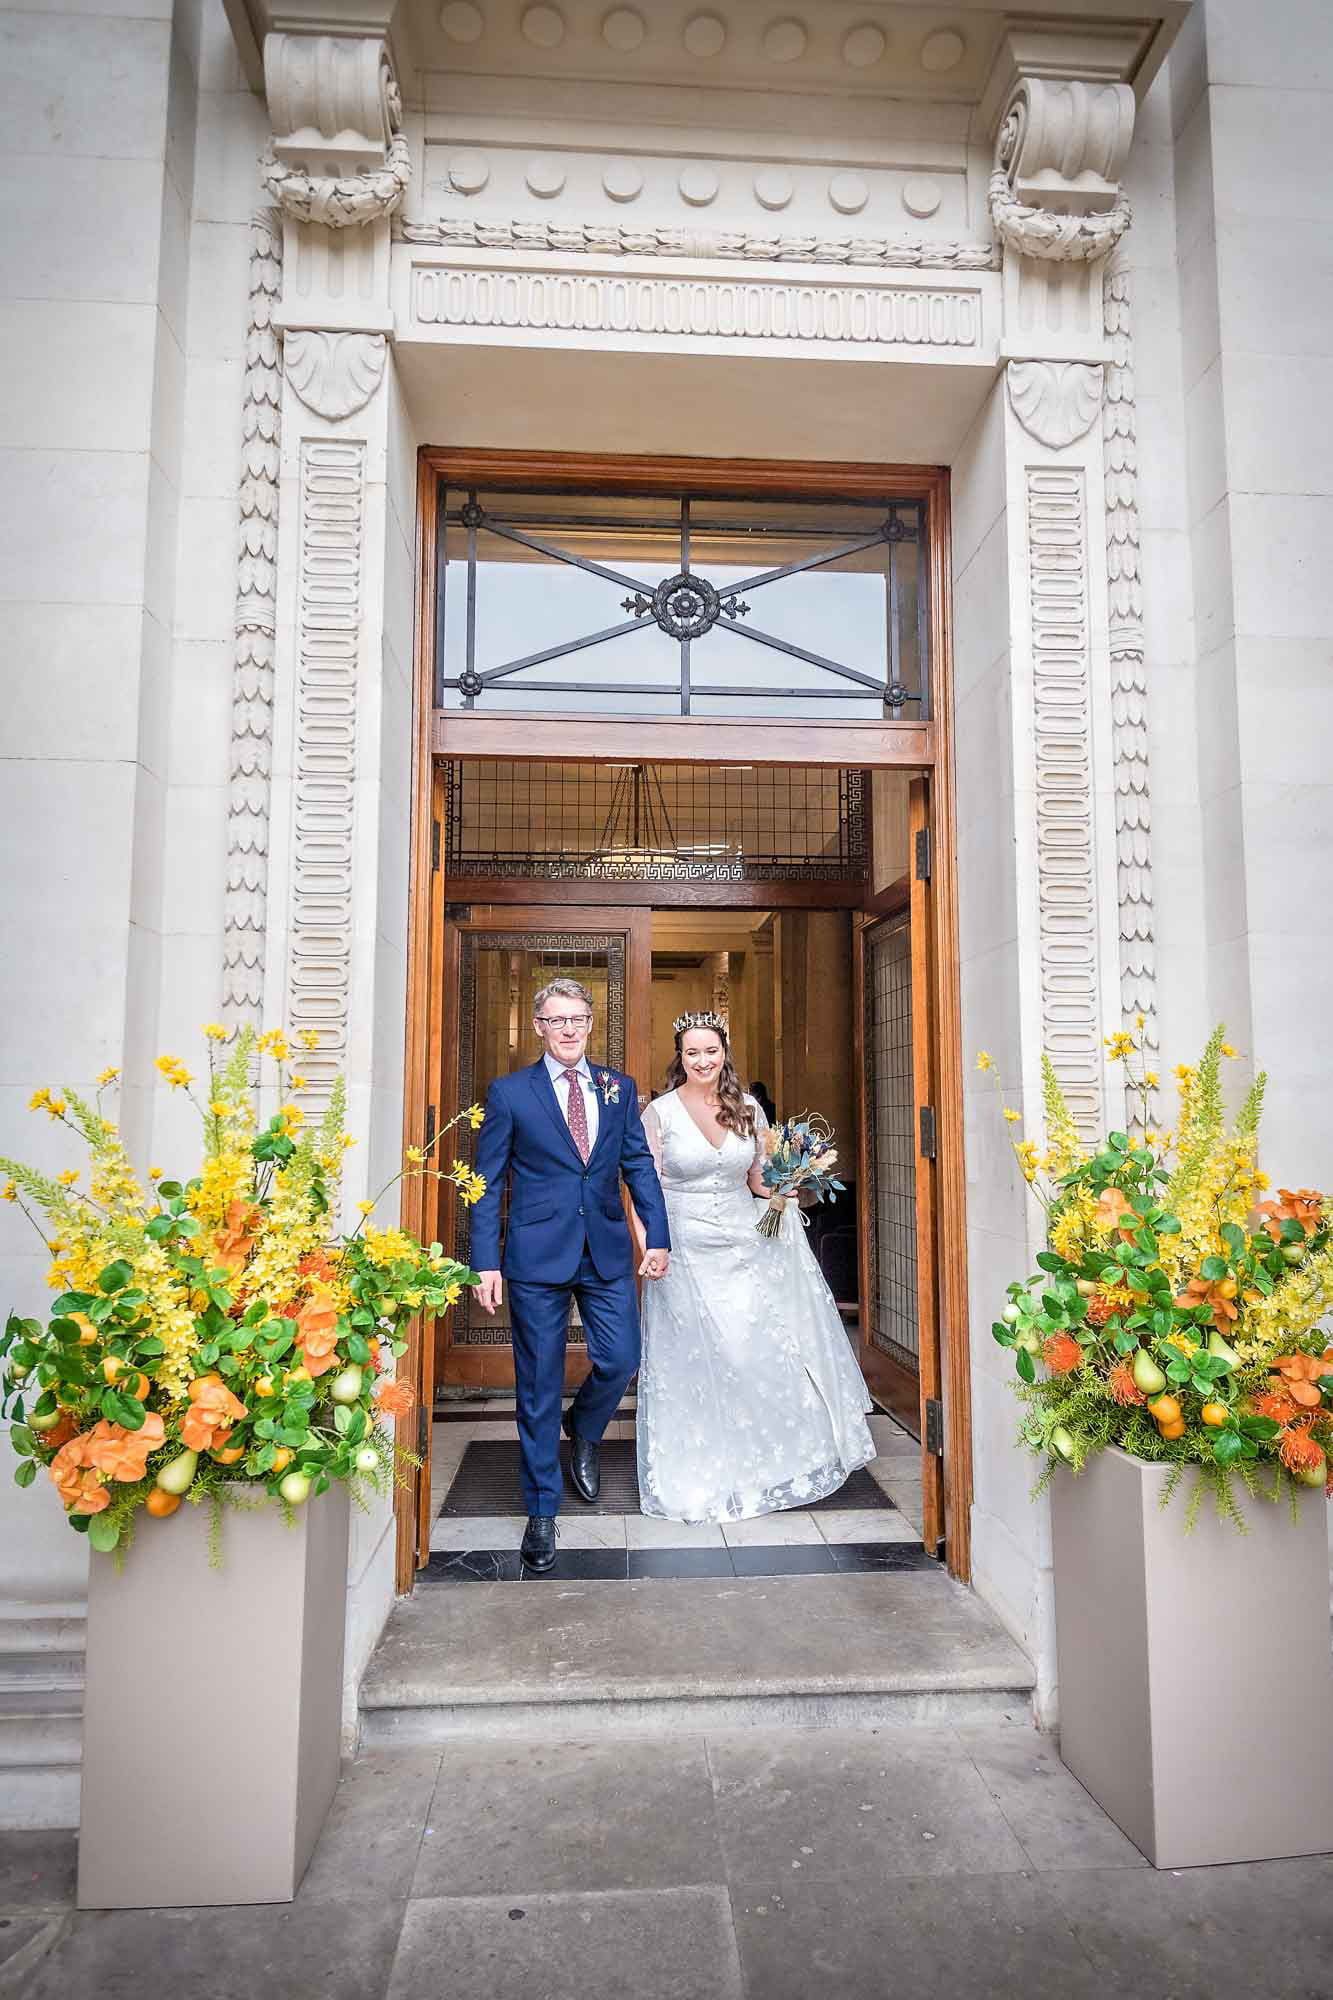 A beaming bride and groom exit the Old Marylebone Town Hall after their wedding ceremony